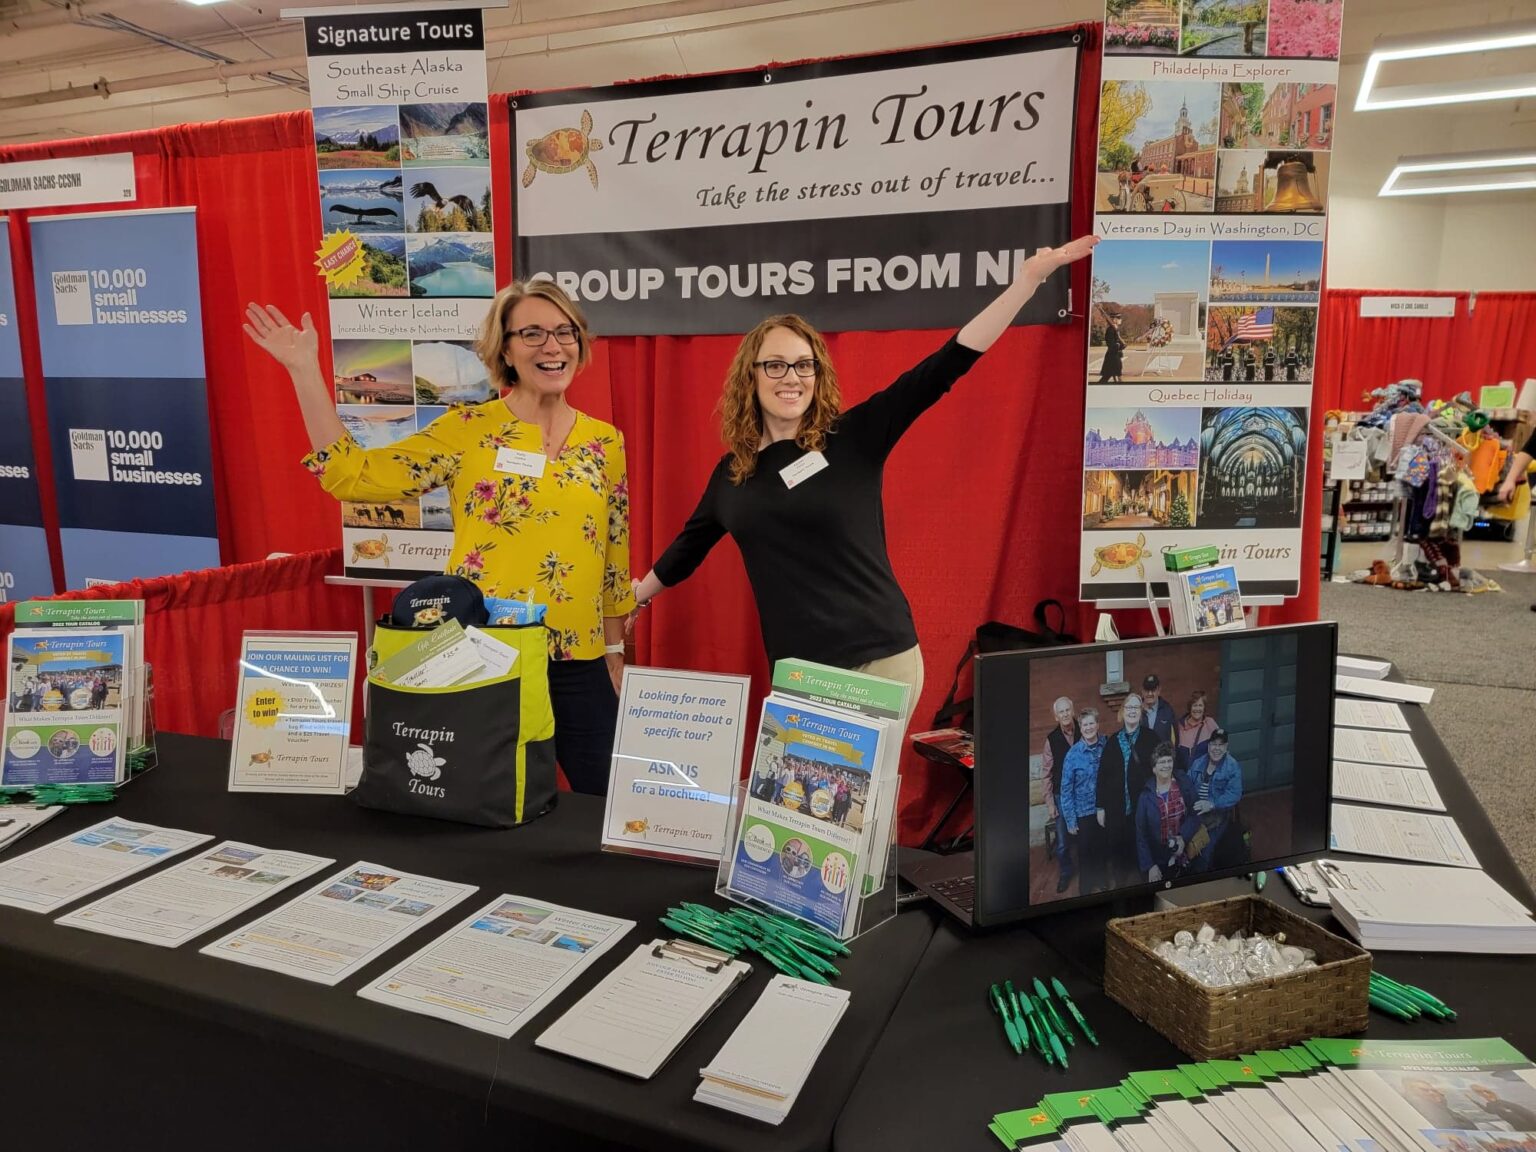 Offering Group Tours from New Hampshire Terrapin Tours Bus Tours